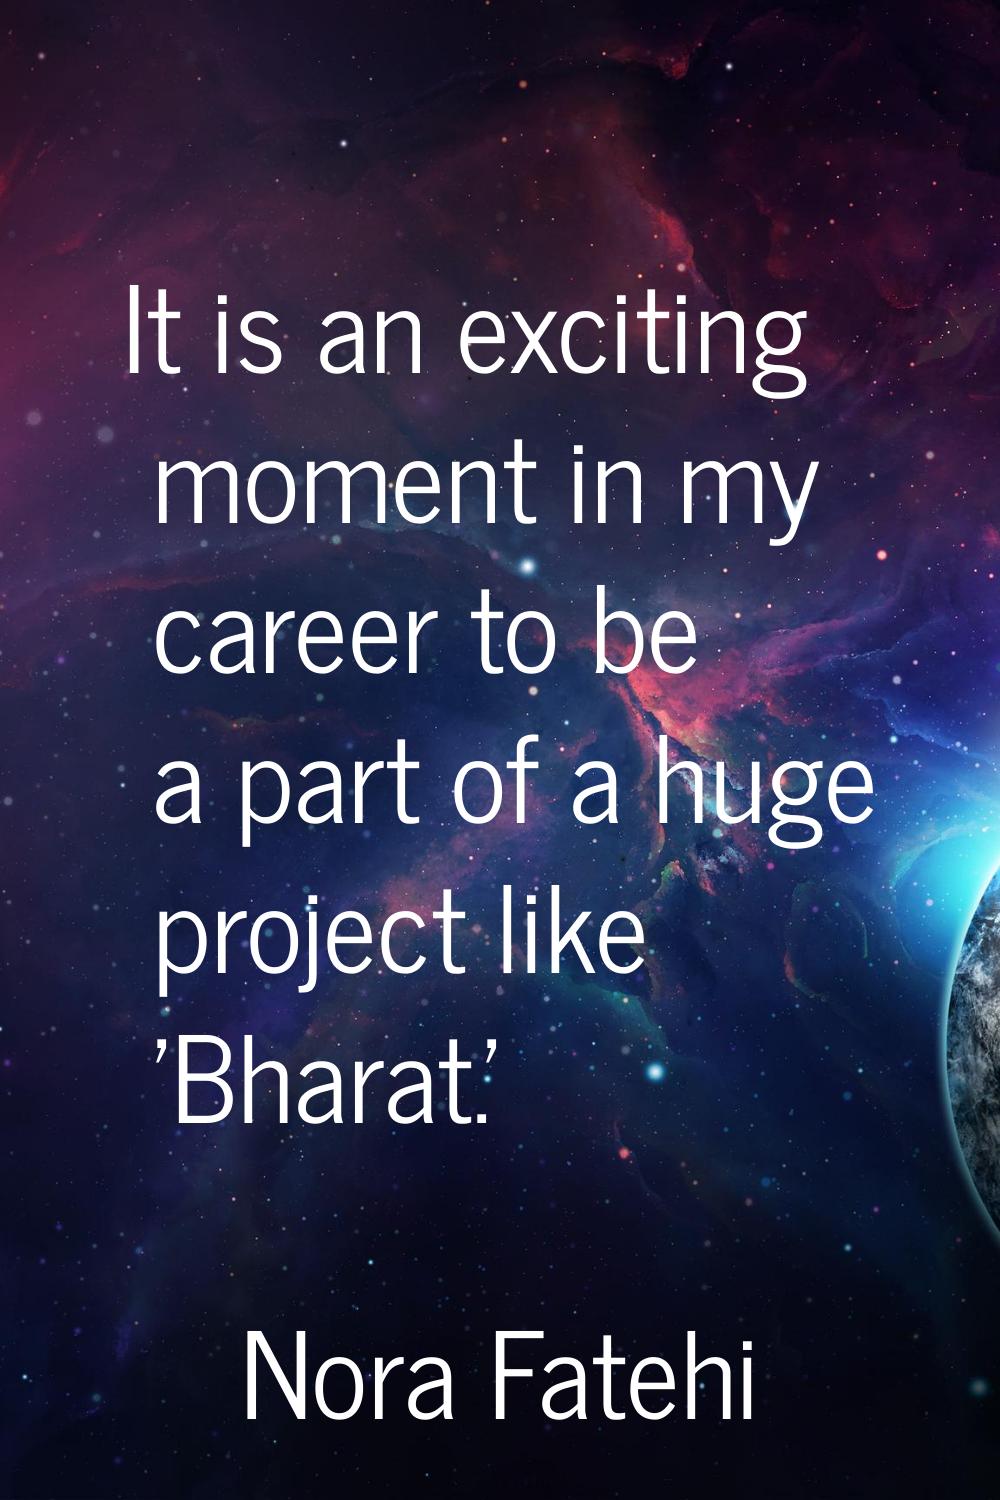 It is an exciting moment in my career to be a part of a huge project like 'Bharat.'